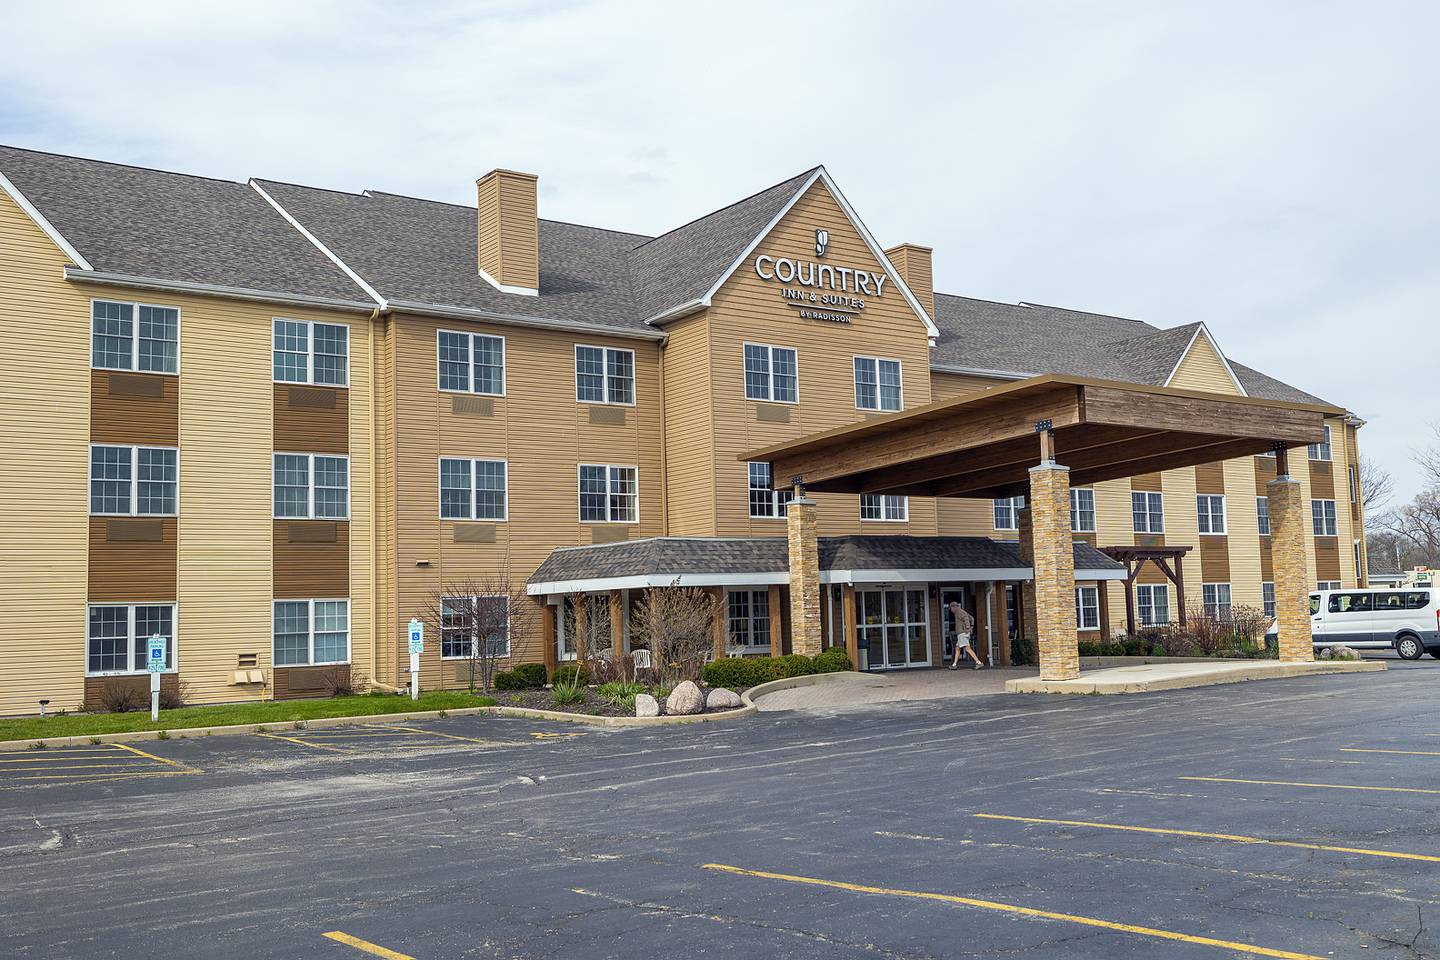 Rock Falls’ Country Inn and Suites is being allowed to reopen after having been closed down by the city fire chief.